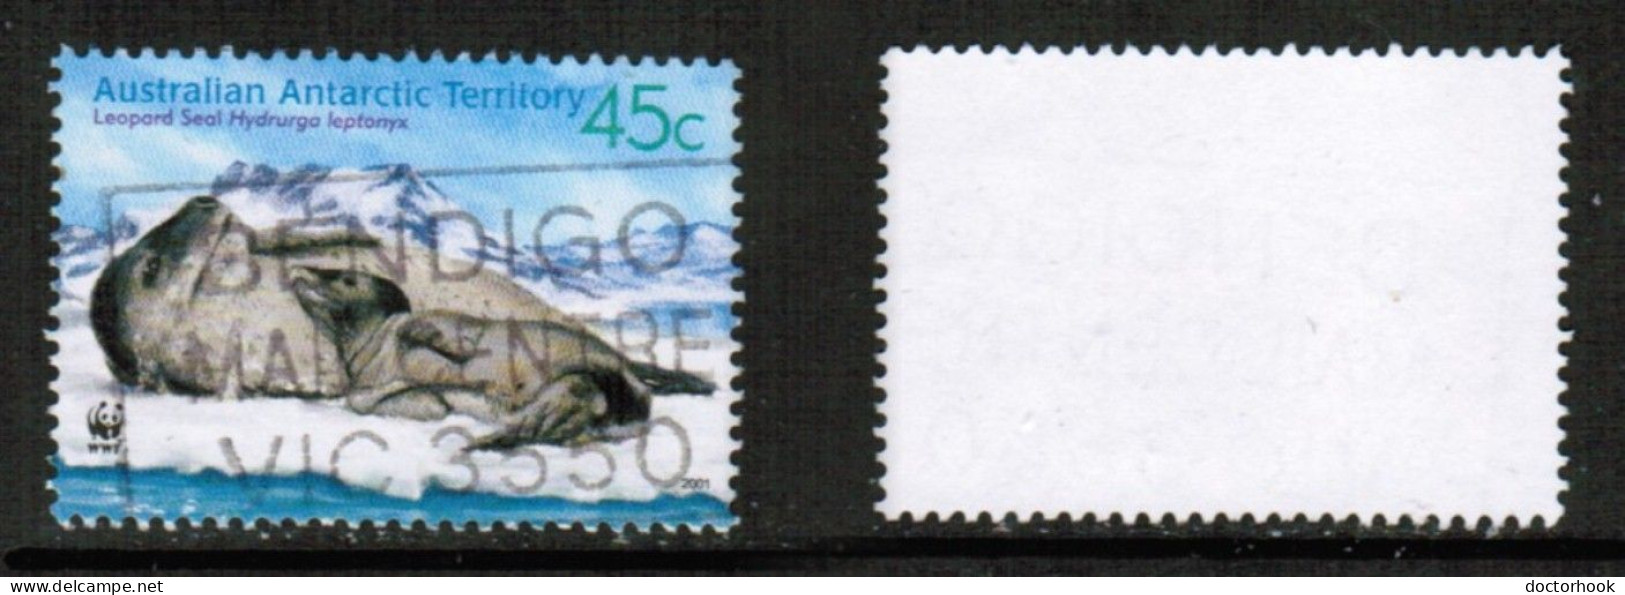 AUSTRALIAN ANTARCTIC TERRITORY   Scott # L 118a USED (CONDITION AS PER SCAN) (Stamp Scan # 930-11) - Gebraucht